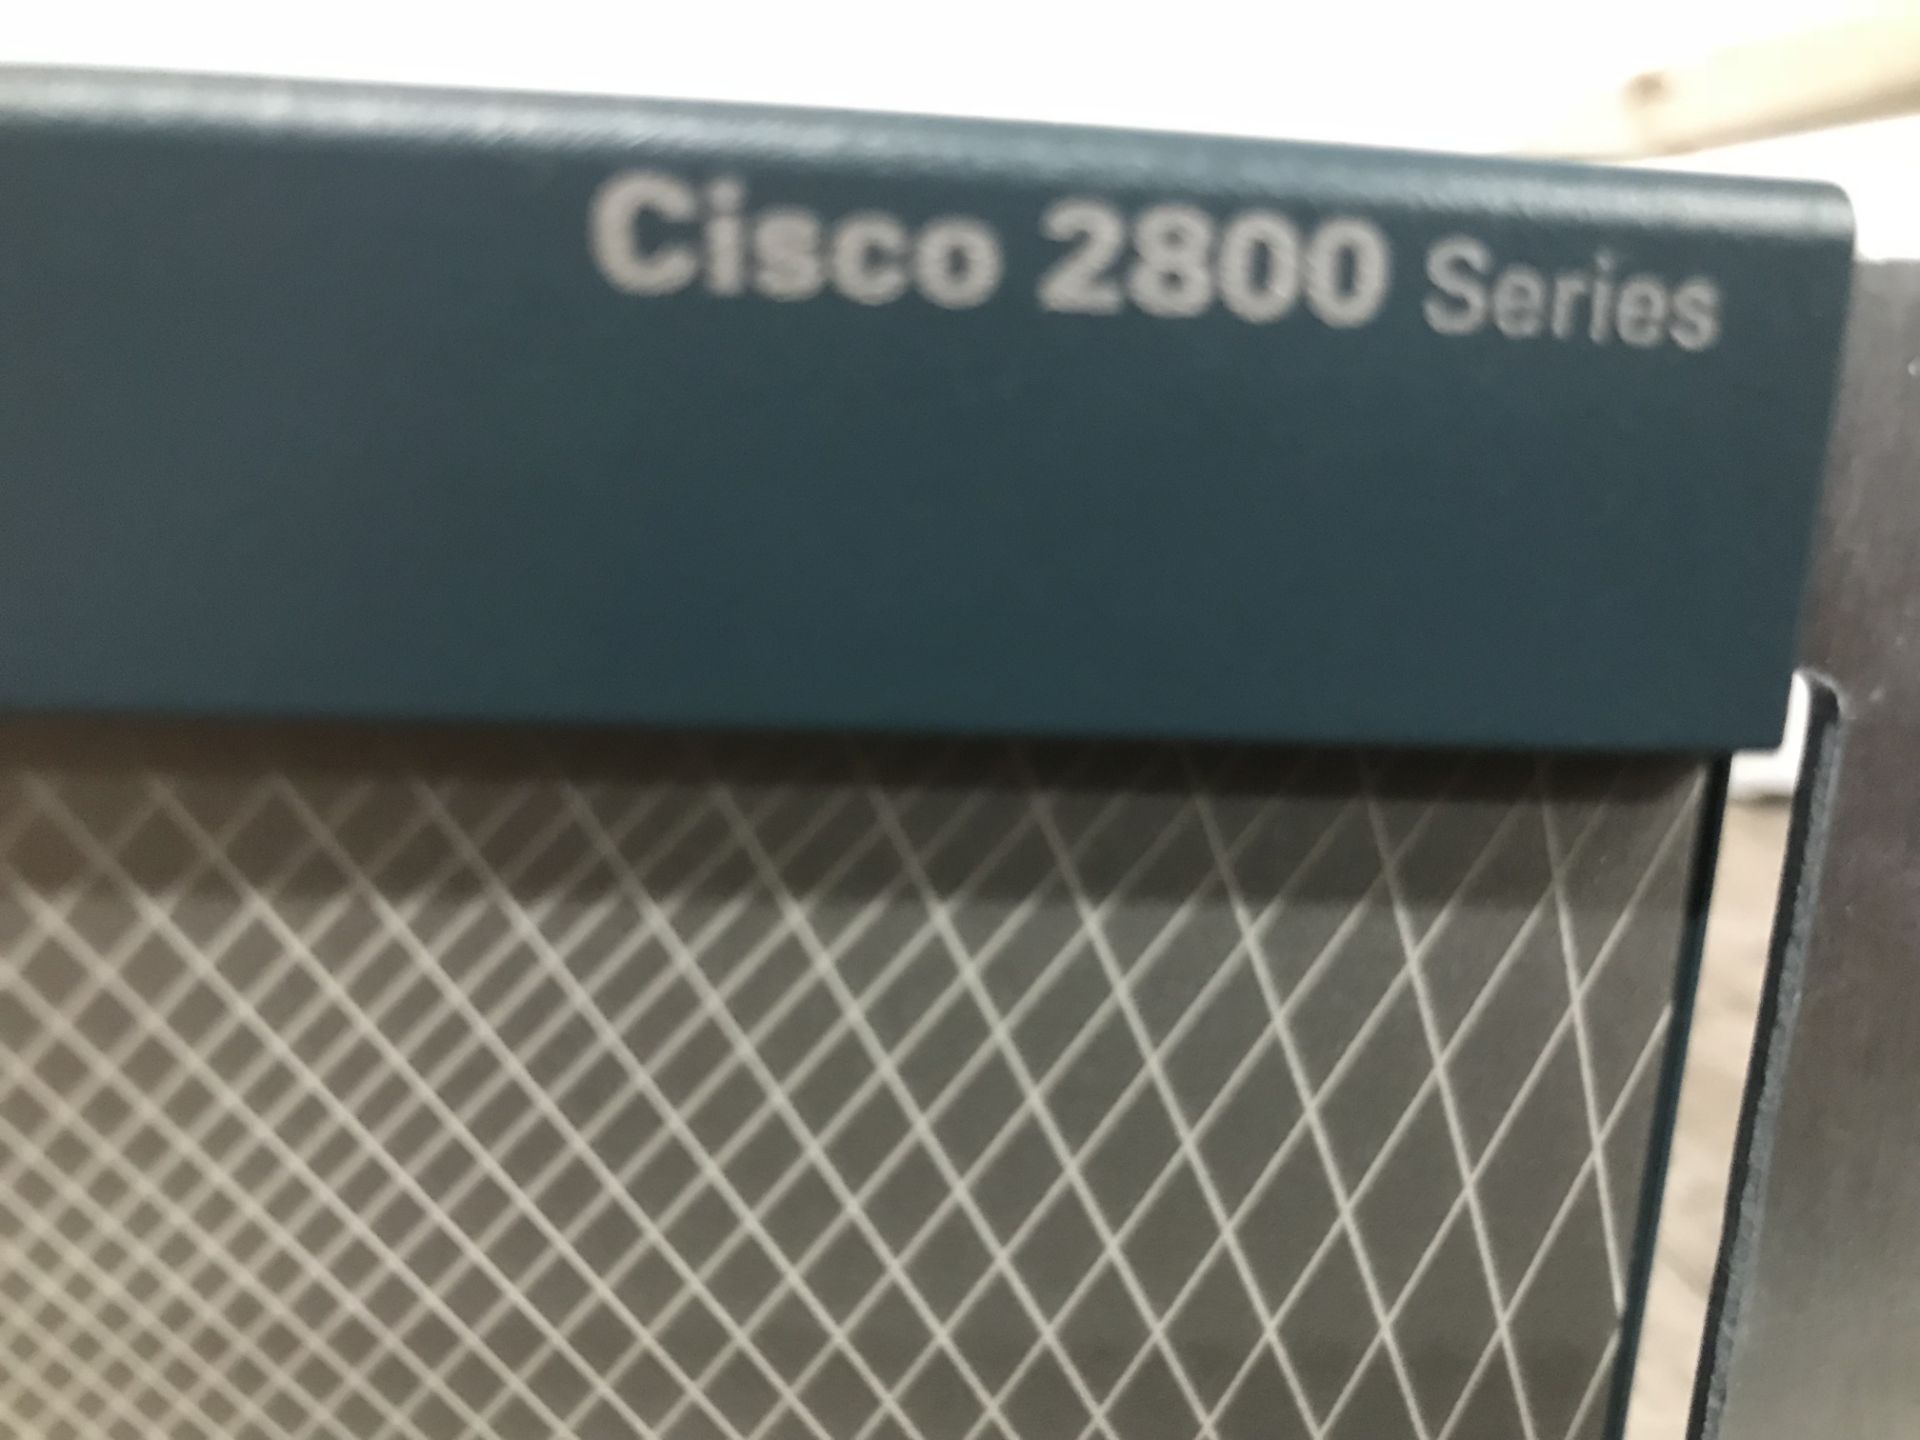 Cisco 2800 Series Router - Image 3 of 4